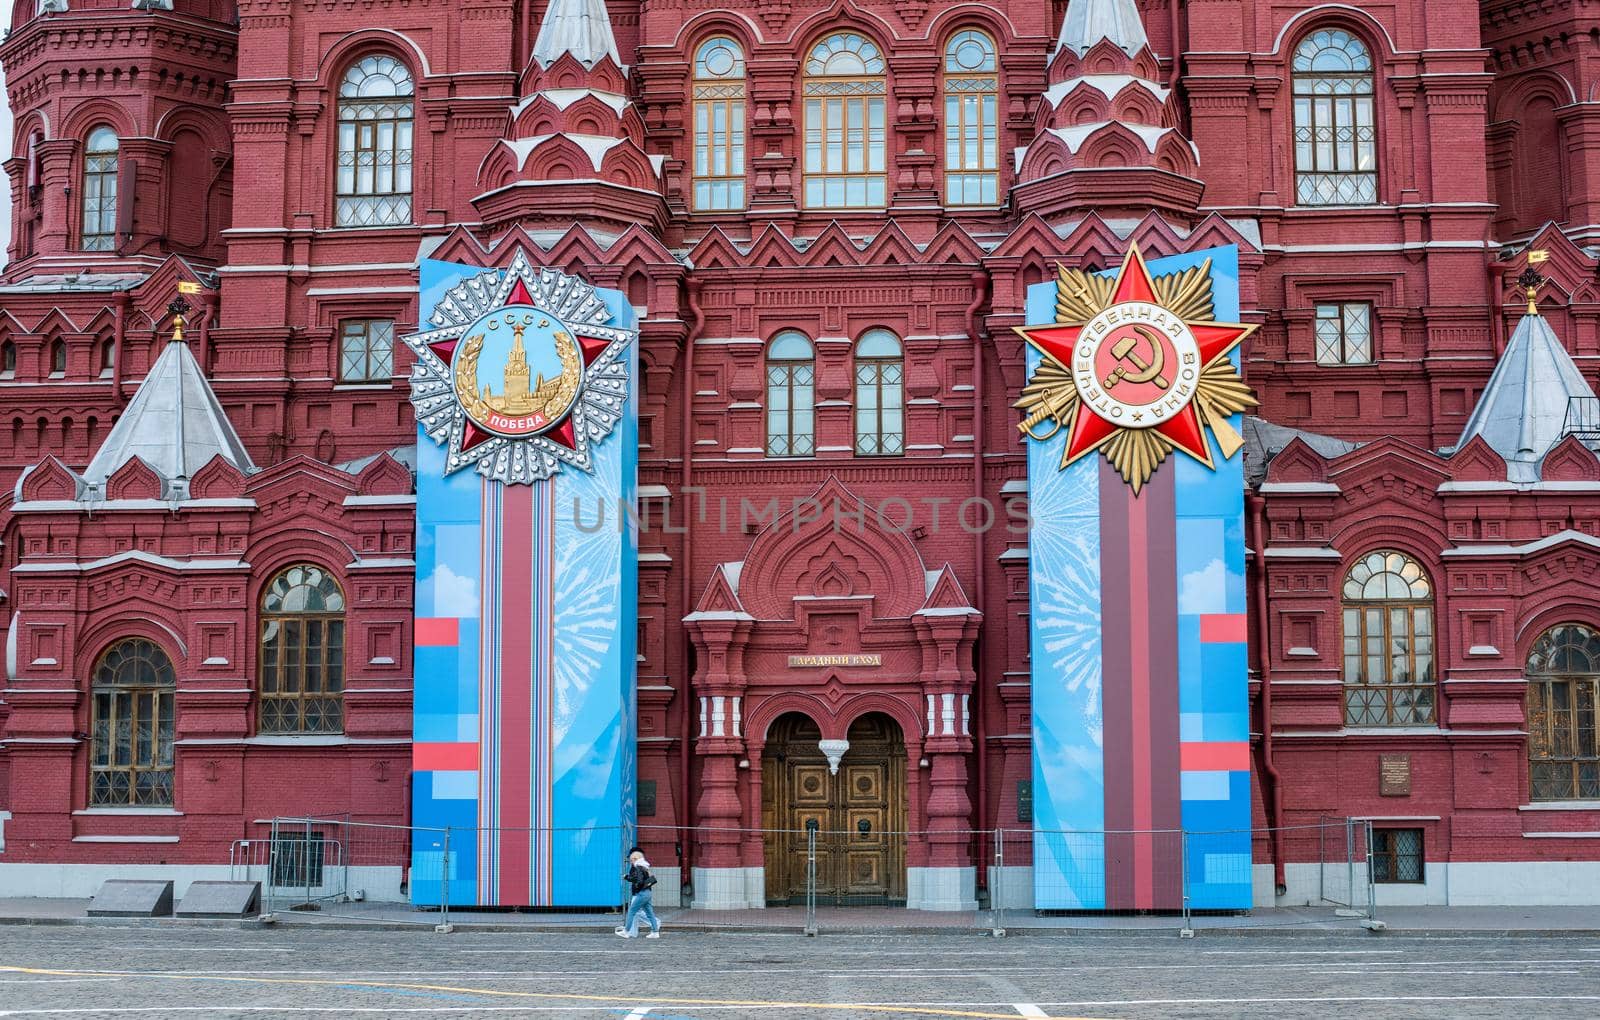 April 25, 2021 Moscow, Russia Festive decorations dedicated to the Victory Parade on Red Square in Moscow.